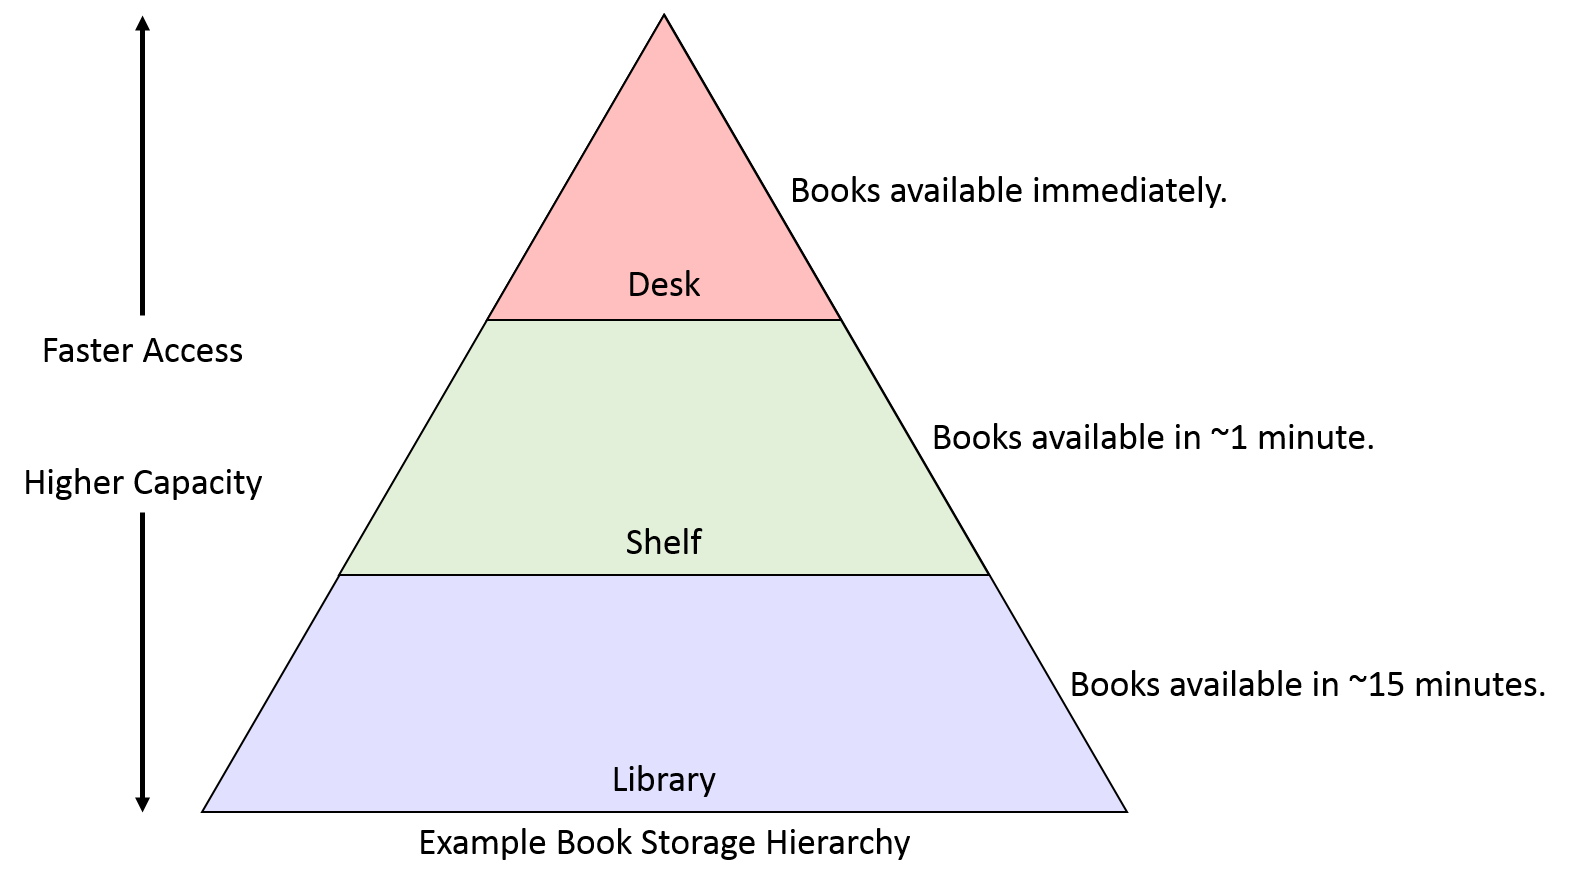 In order, from (quick access, low capacity) to (slow access, high capacity): desk, shelf, library.